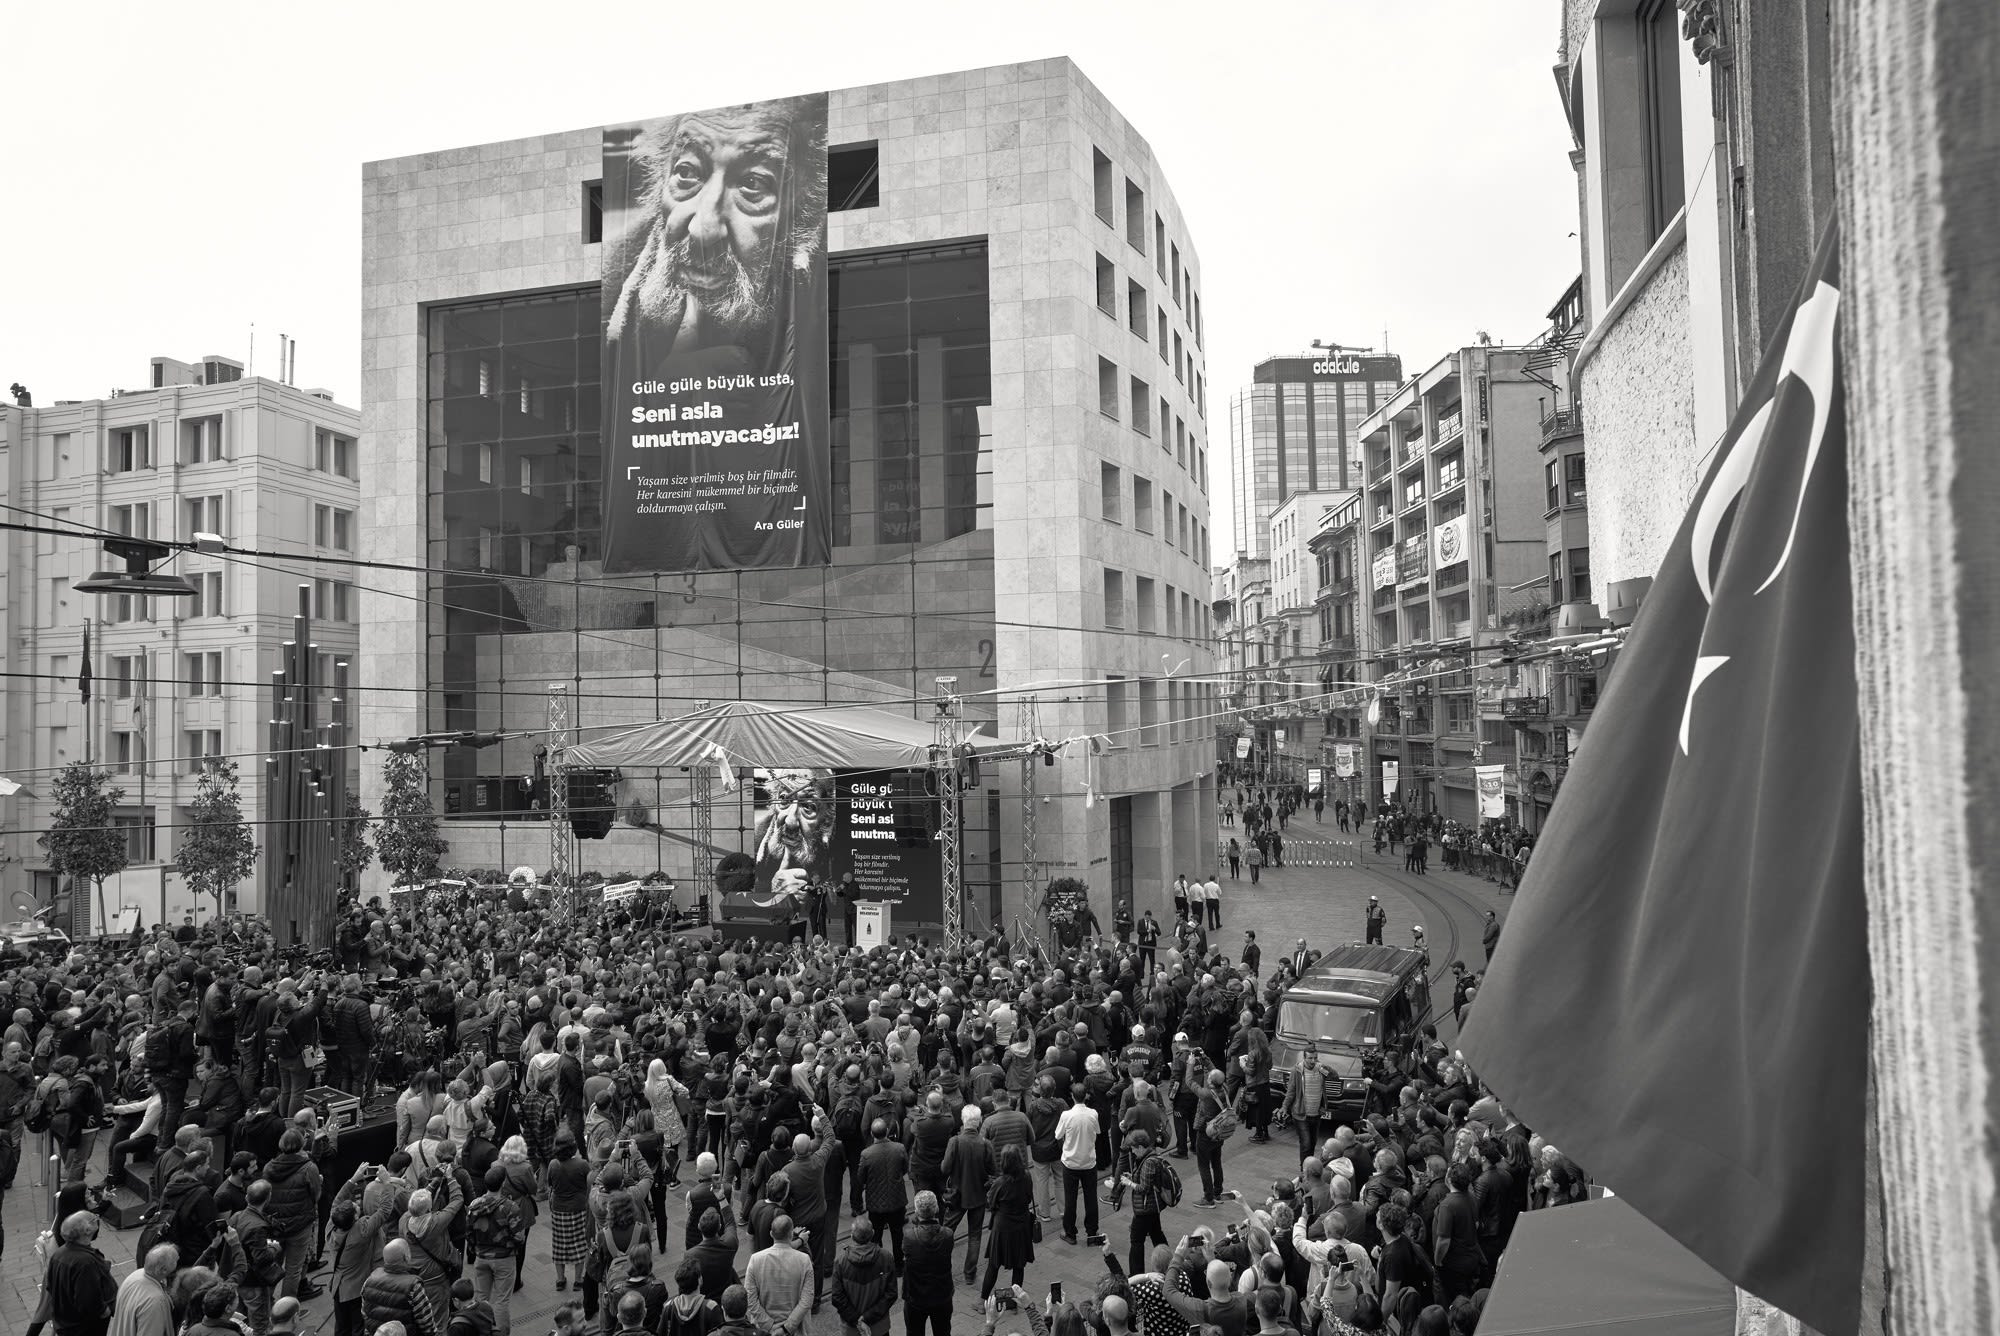 The funeral ceremony of master Turkish-Armenian photographer Ara Güler was held on 20 October 2018 at Galatasaray Square in Istanbul.